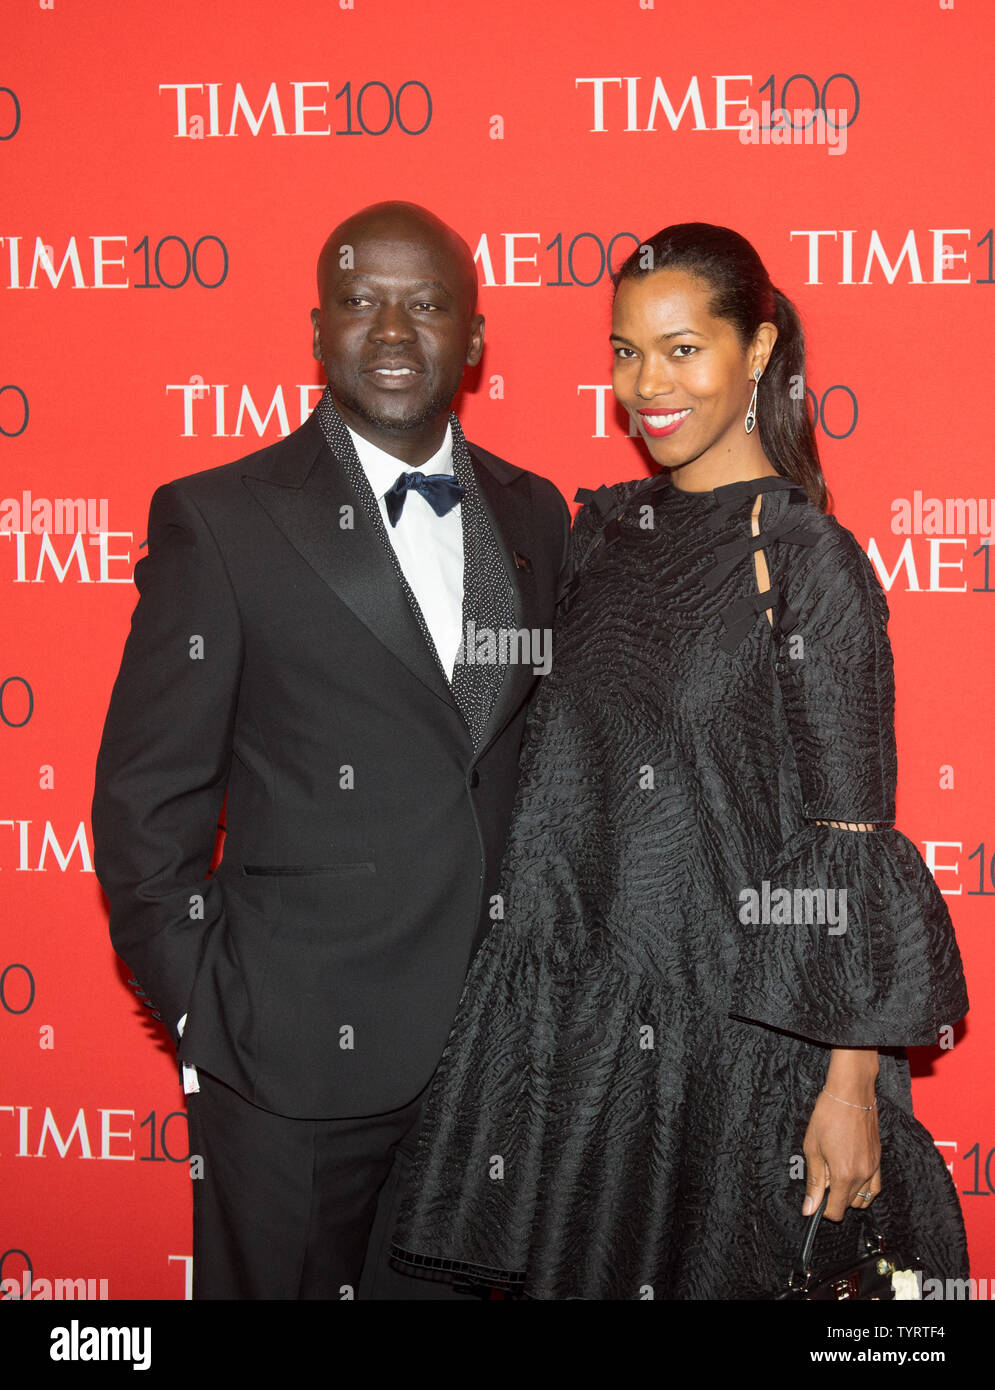 Sir David Adjaye and Ashley Shaw- Scott arrive on the red carpet at the TIME 100 Gala at Frederick P. Rose Hall, Home of Jazz at Lincoln Center, in New York City on April 26, 2017. TIME 100 celebrates TIME Magazine's list of the 100 Most Influential People in the World.      Photo by Bryan R. Smith/UPI Stock Photo